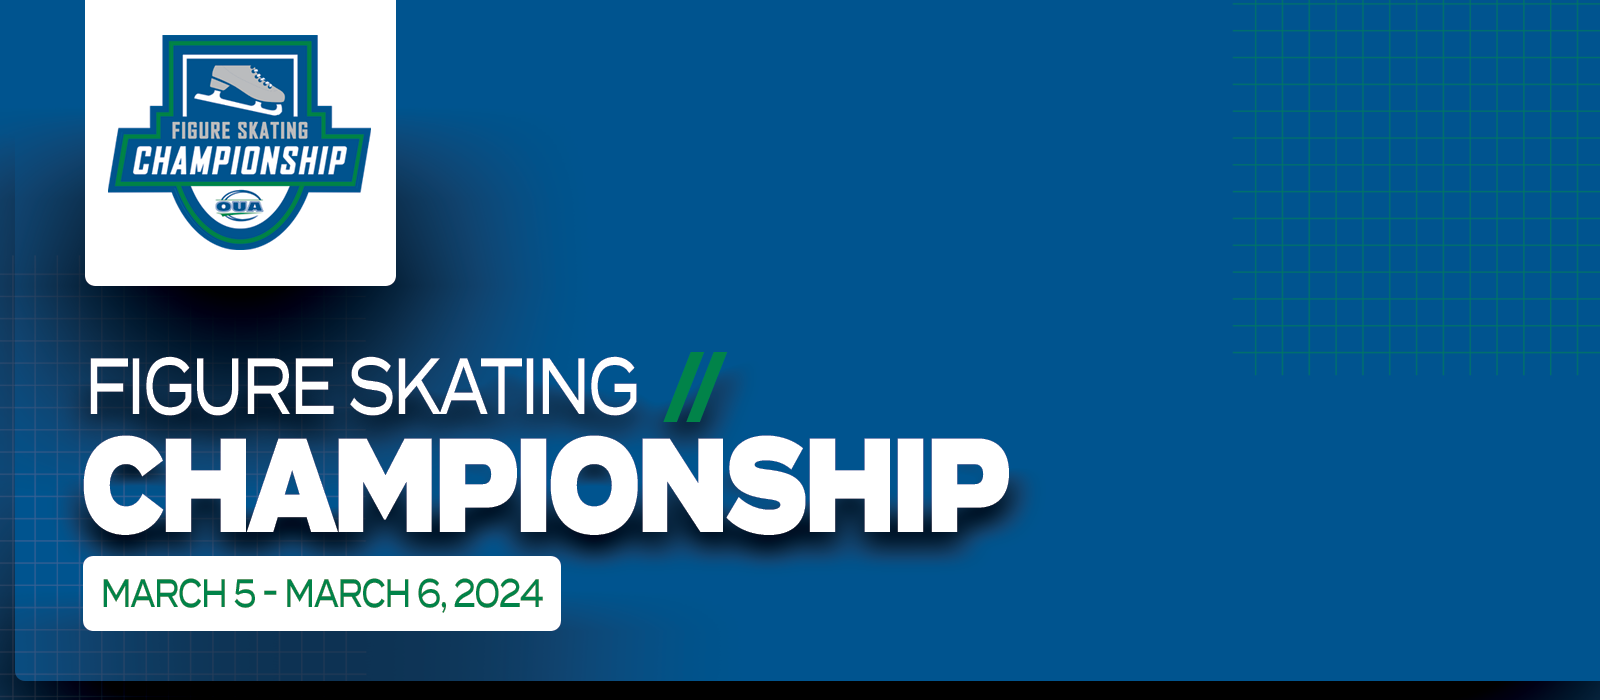 Predominantly blue graphic with large white text on the left side that reads Figure Skating Championship, March 5 – March 6, 2024’ beneath the OUA Figure Skating Championship logo